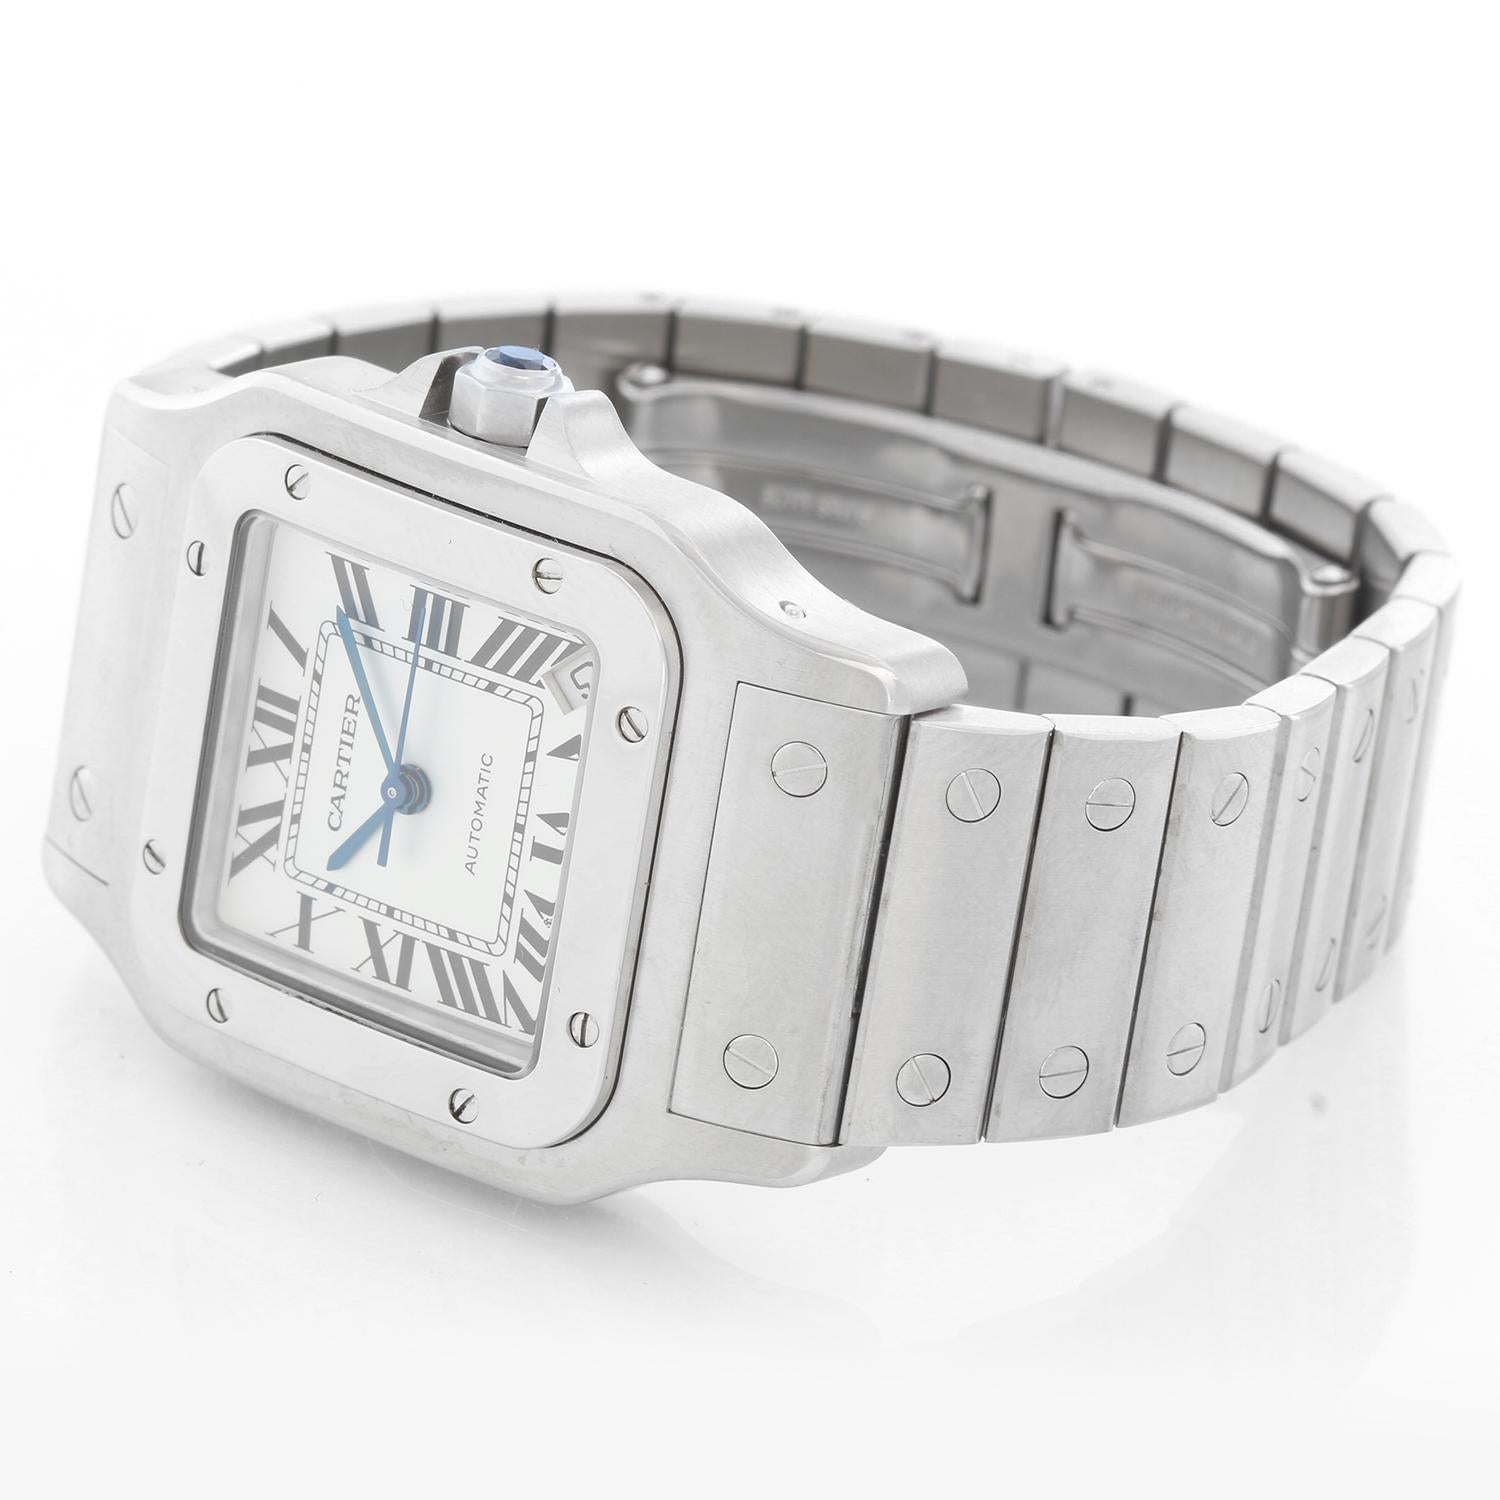 Cartier Santos 100 Steel Automatic Men's Watch W20098D6 - Automatic winding. Stainless steel case (34mm x 45mm). Silver dial with black Roman numerals and date at 5 o'clock. Stainless steel Cartier deployant style bracelet; fits a 6 inch wrist but